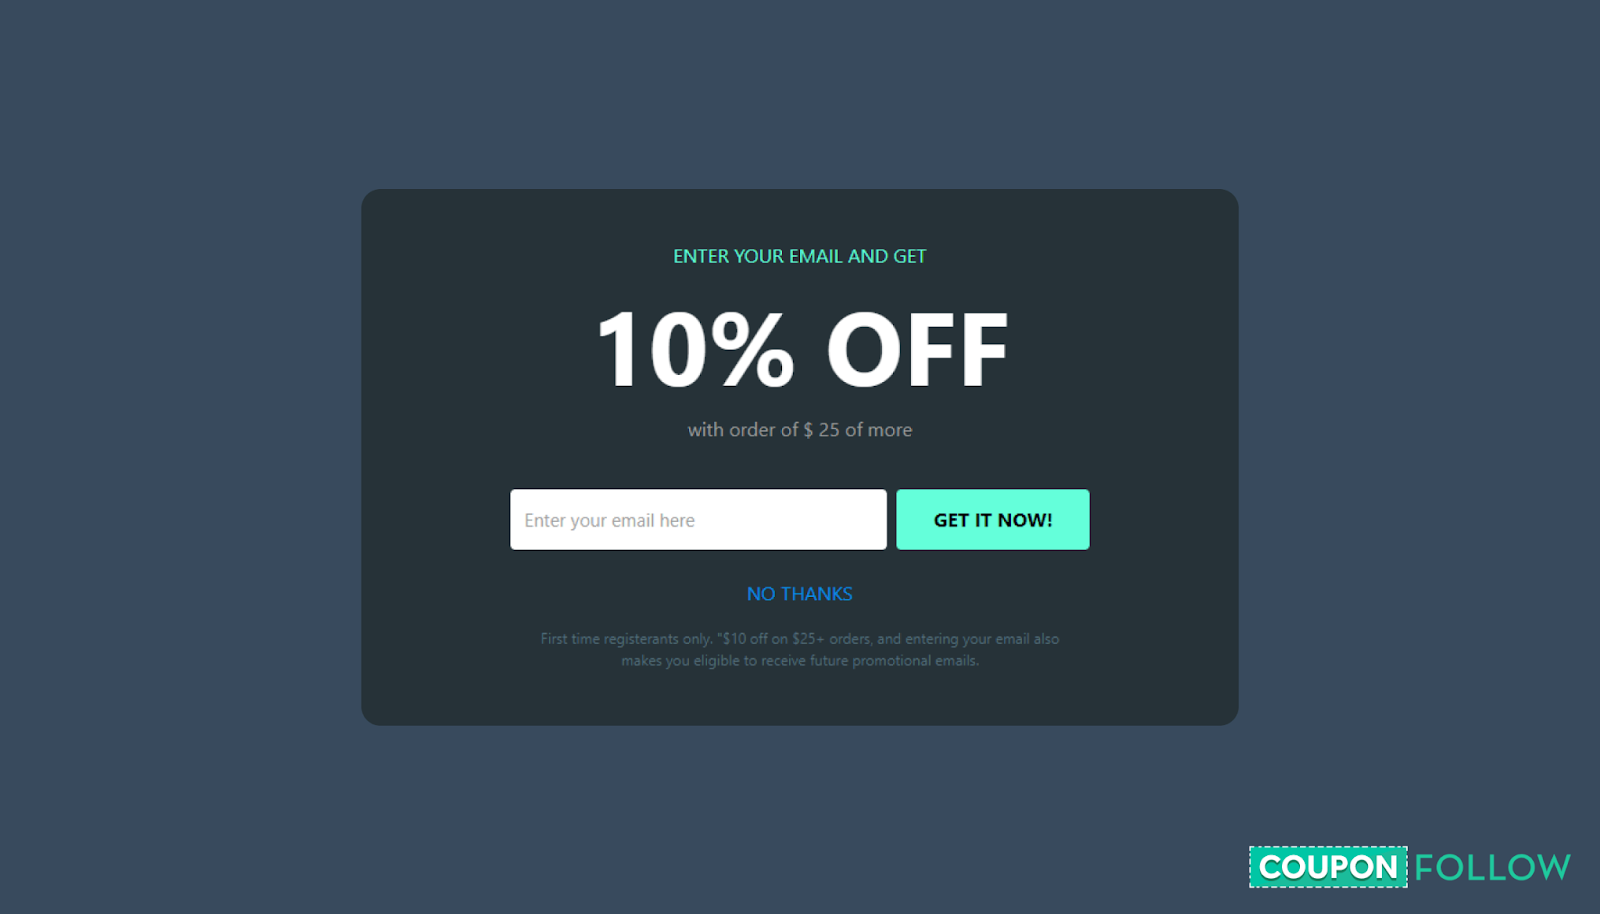 Illustration showing how a single-use coupon code looks like